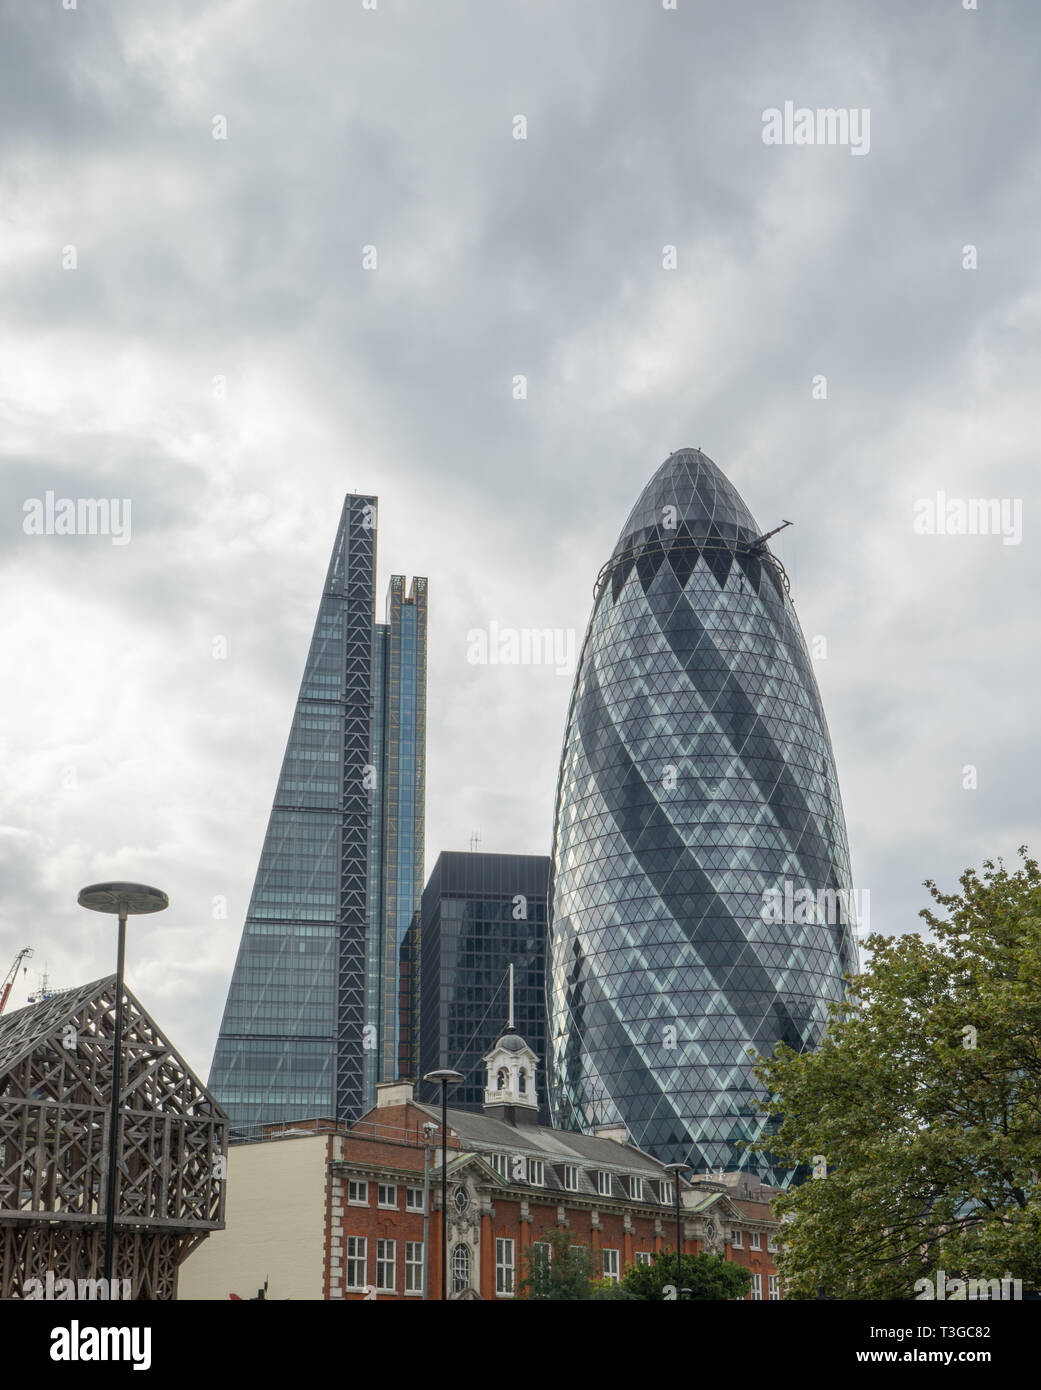 ‘Gherkin’ and ‘Cheese Grater’ skyscrapers from street level Stock Photo